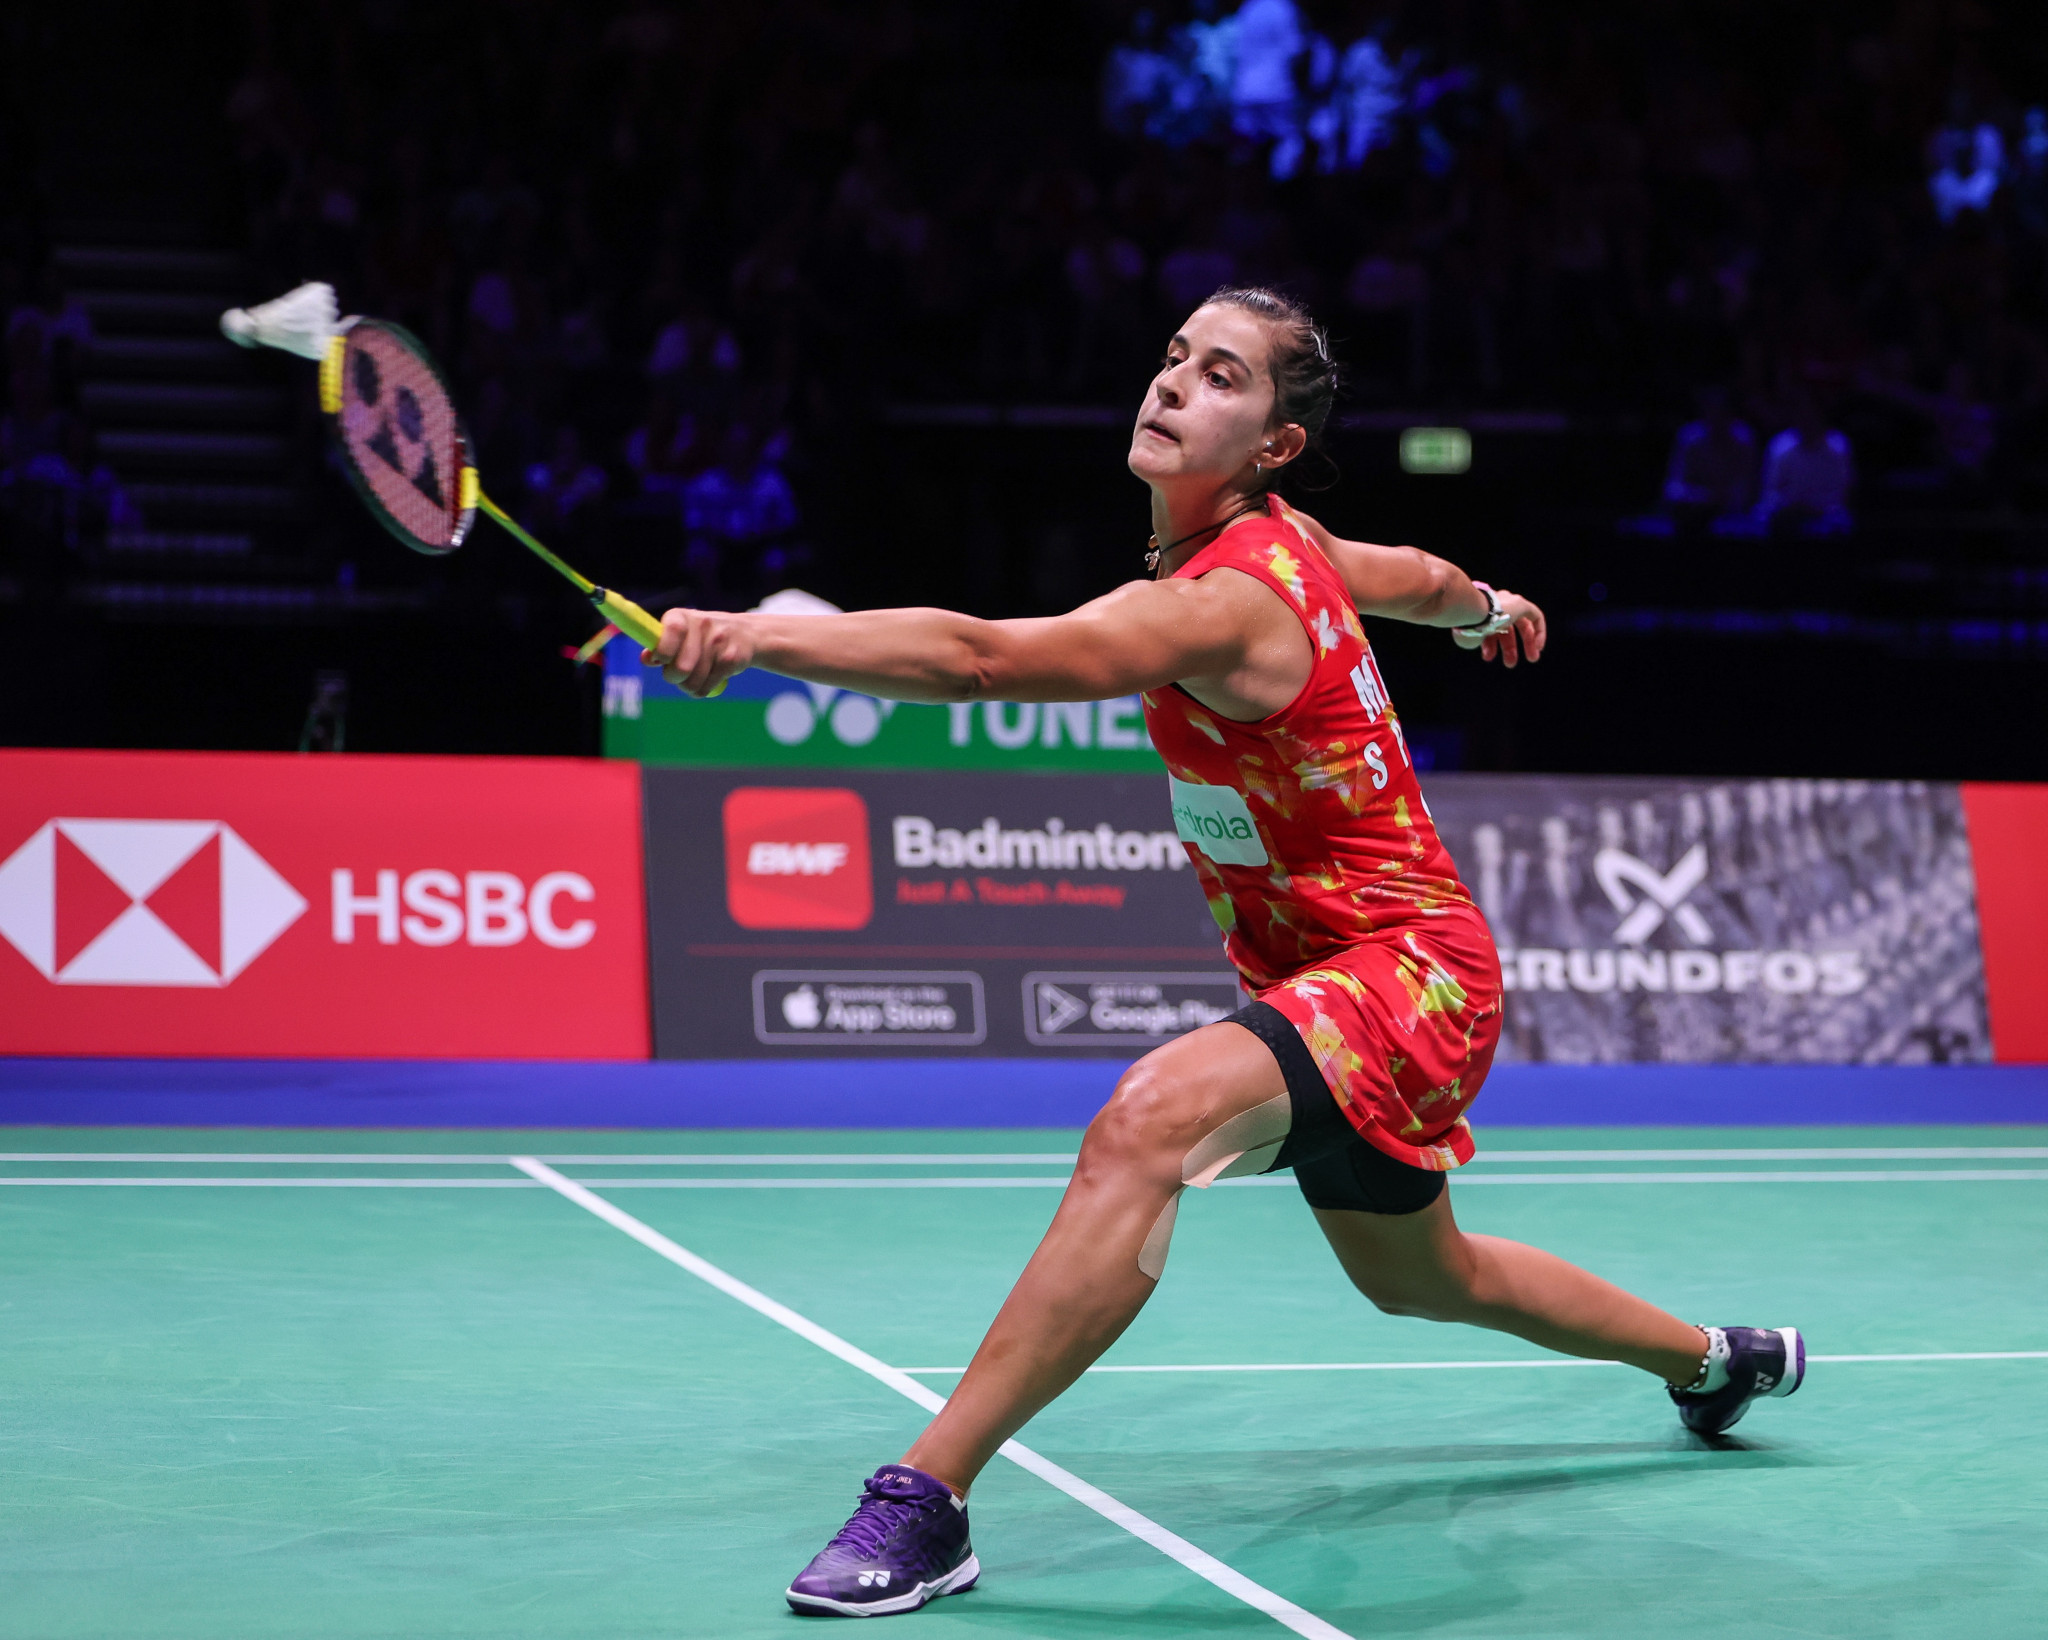 Three-time world champion Carolina Marín of Spain overcame Japanese second seed Akane Yamaguchi to advance to the final ©Badmintonphoto